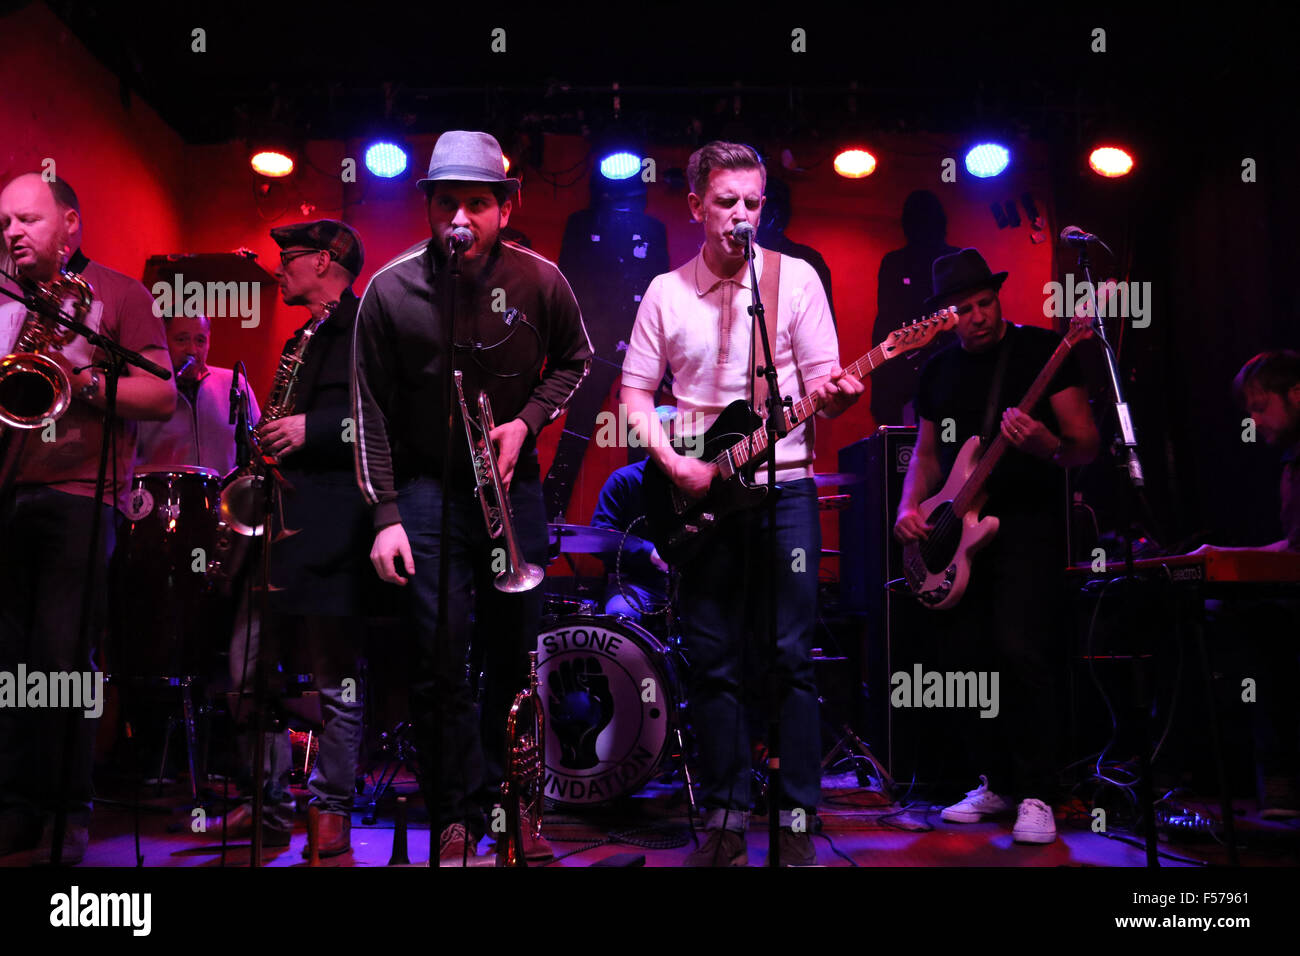 Koln, Germany. 28 October 2015. Stone Foundation live in concert at Sonic Ballroom, Koln. A small venue but a superb gig and a totally captivating soul sound that wowed the audience. Credit:  Ashley Greb/Alamy Live News. Stock Photo